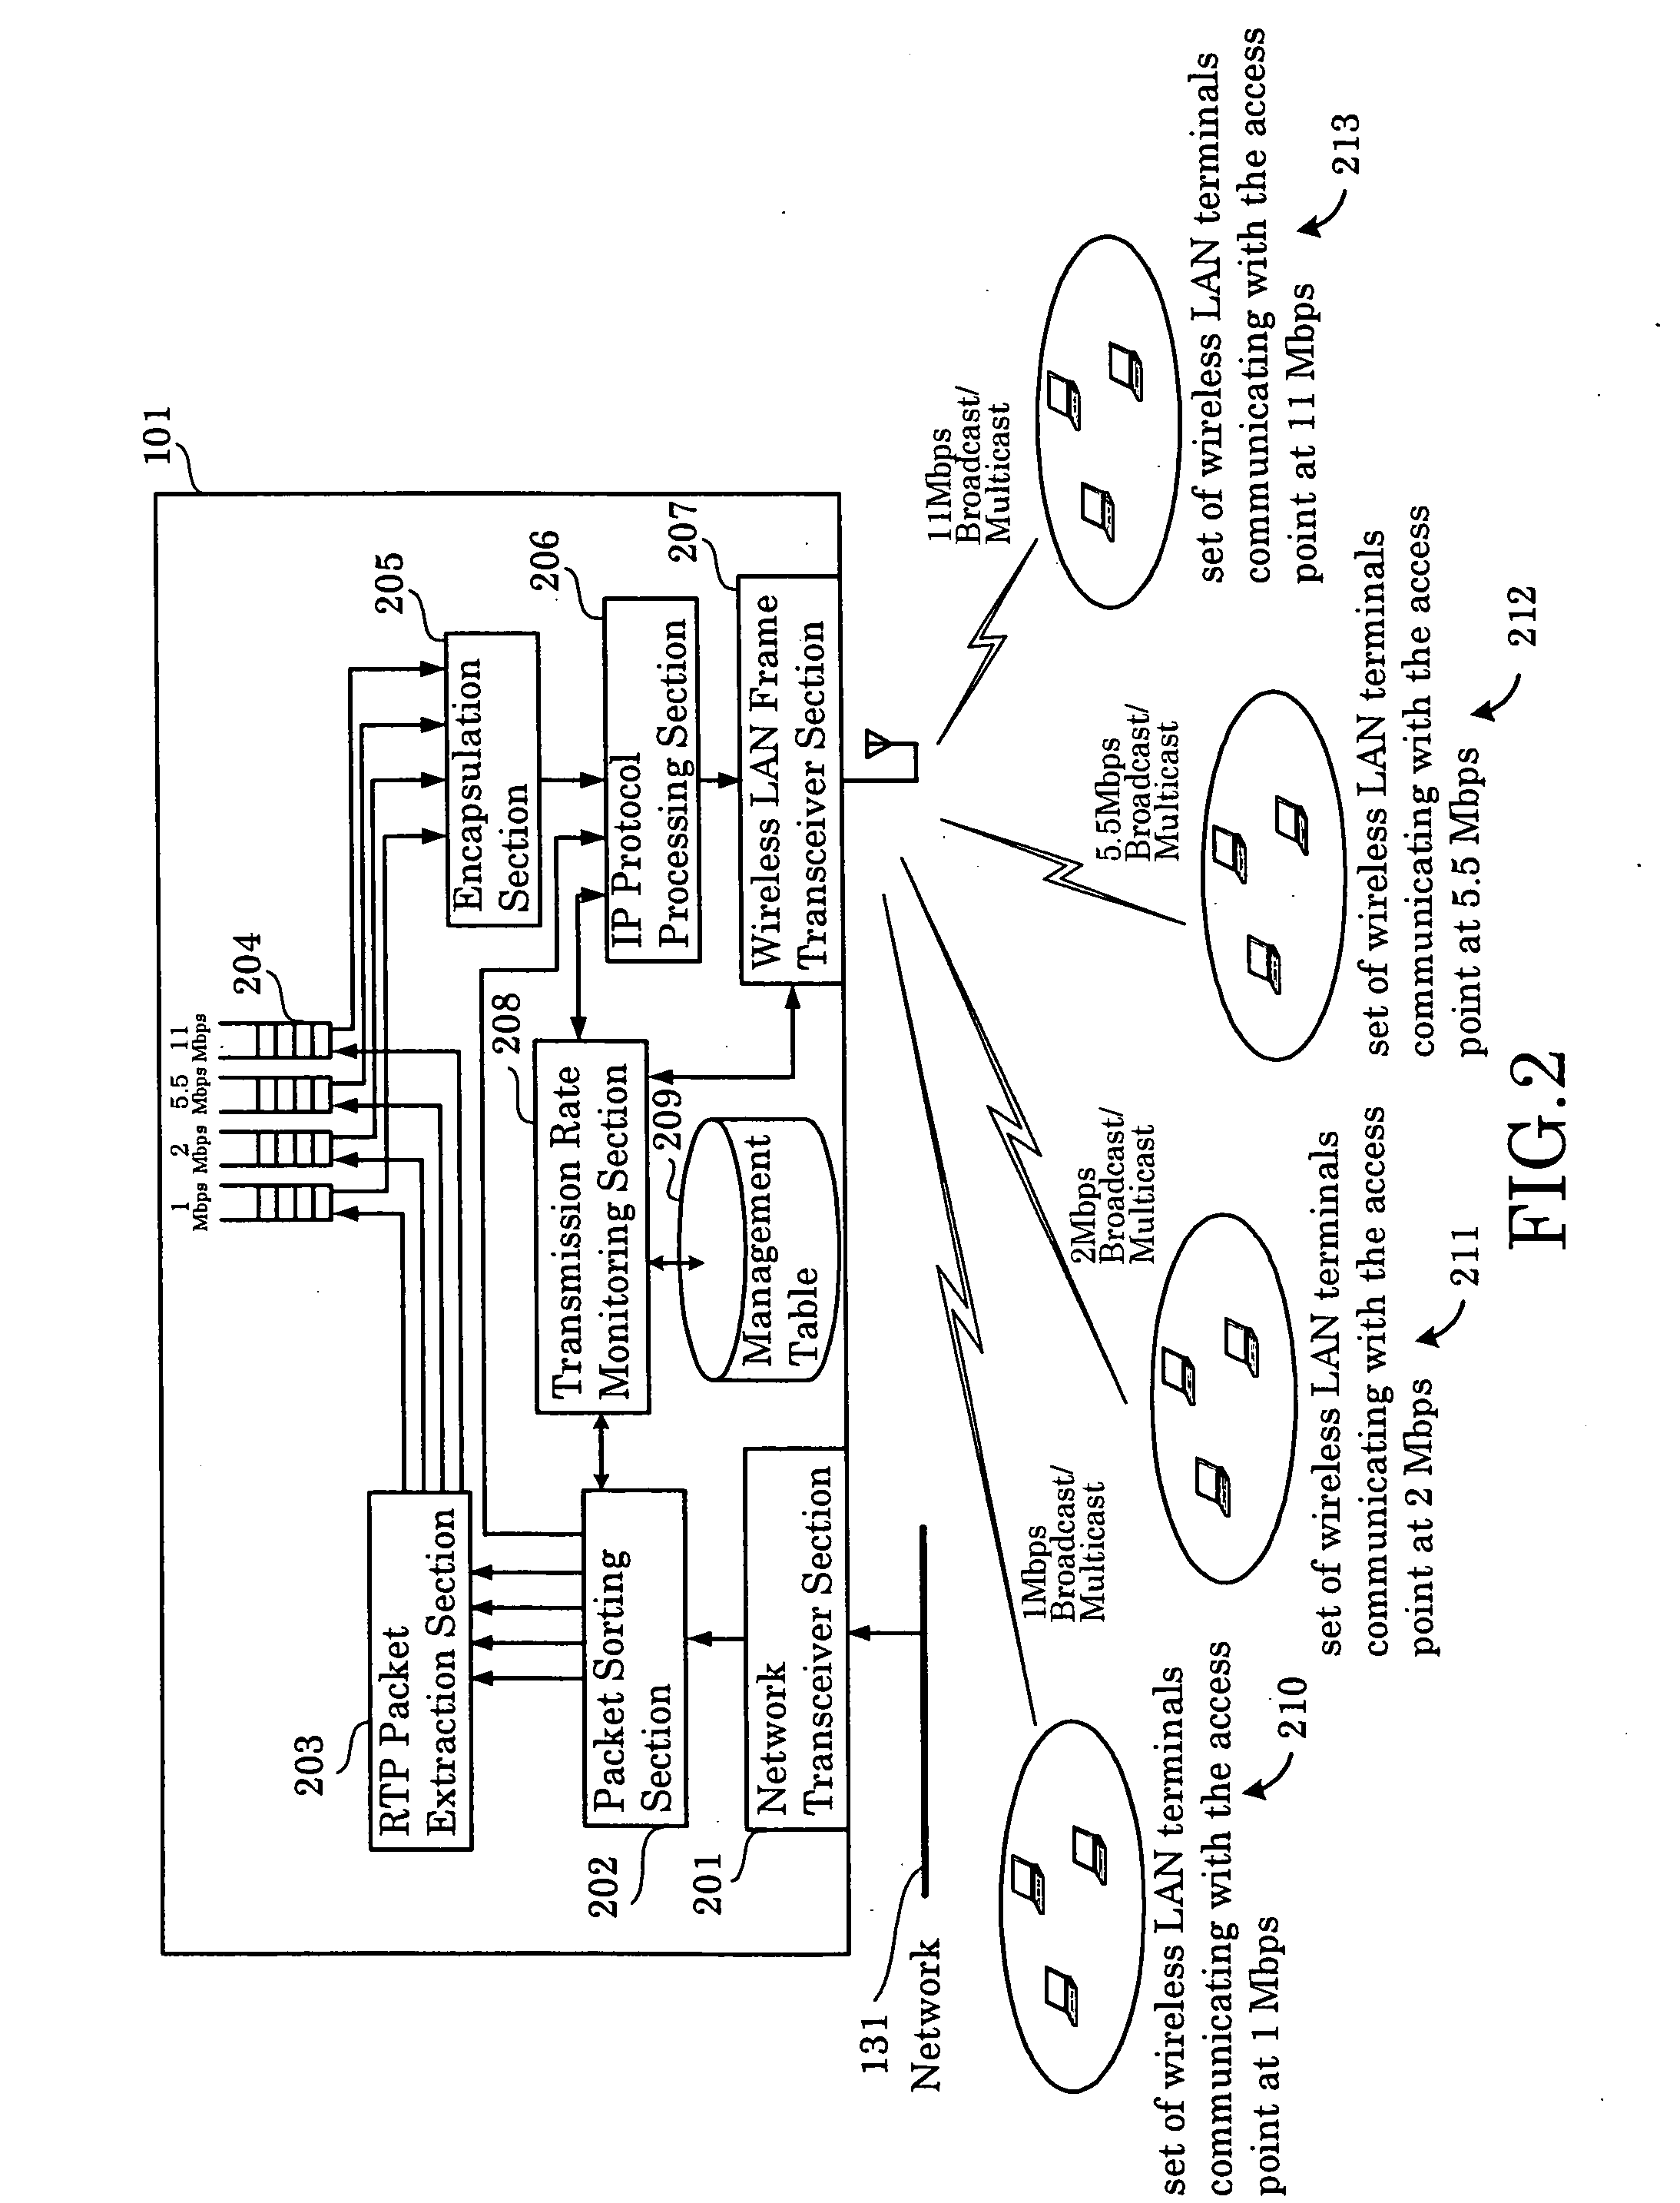 Packet transmission method and apparatus